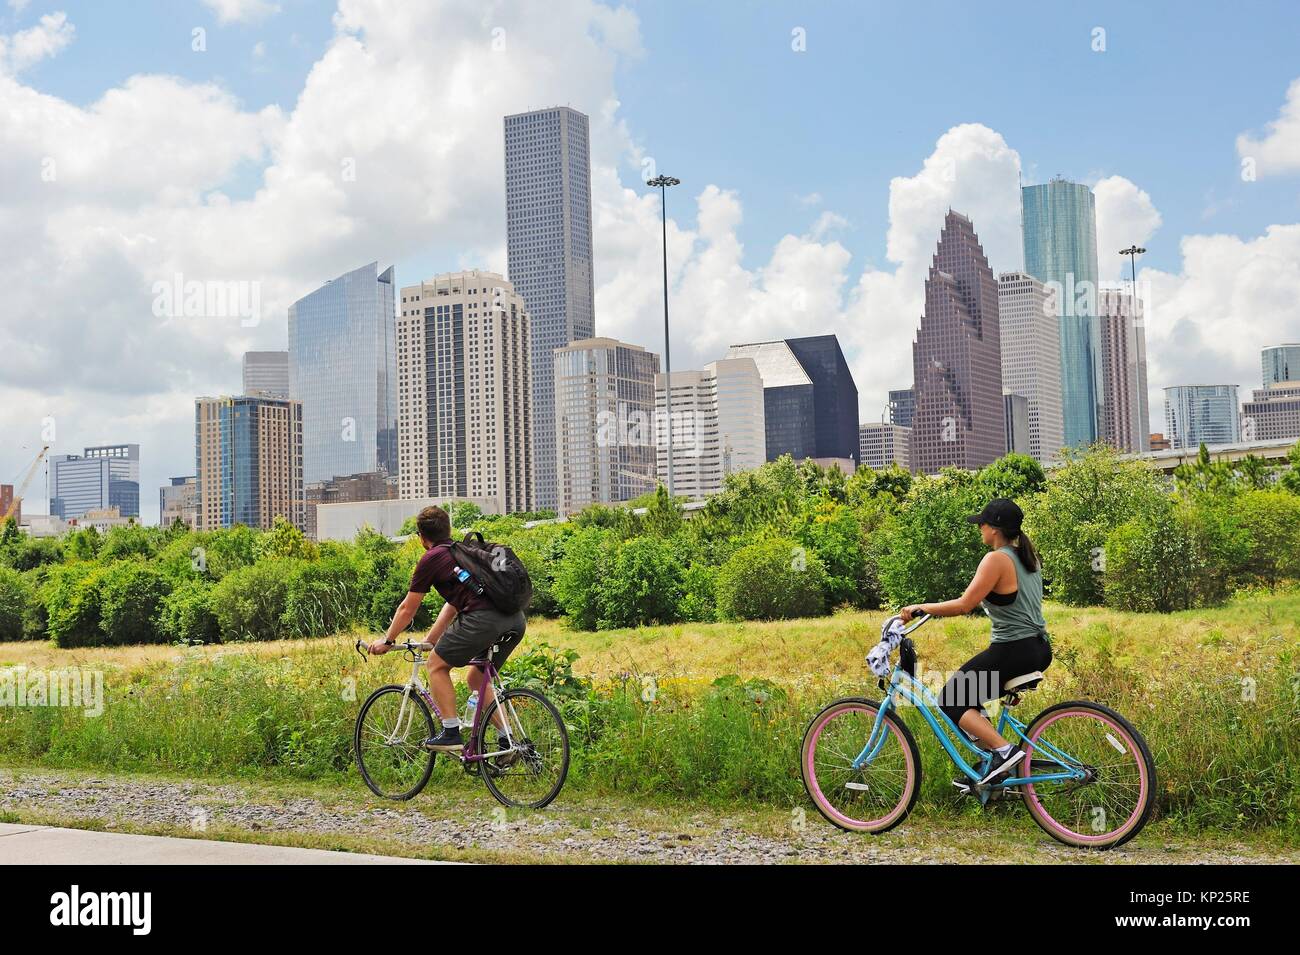 cycle lane along the White Oak River with the skyline in the background, Houston, Texas, United States of America, North America. Stock Photo